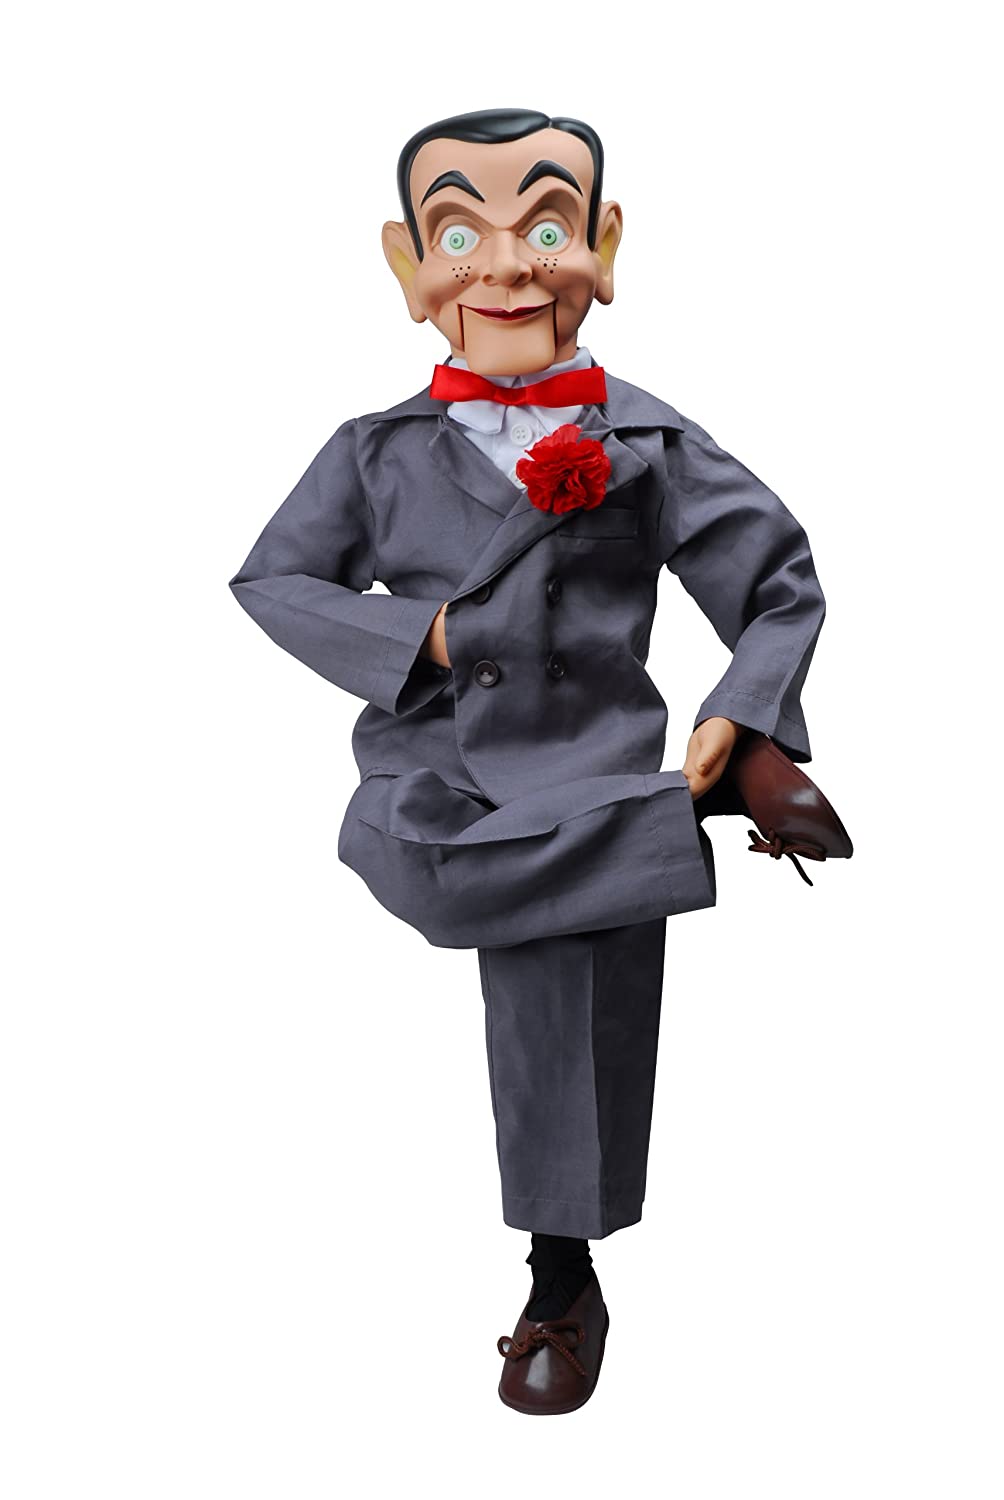 Top 9 Best Ventriloquist Dummies for Kids 2022 - Full Buyer's Guide 3